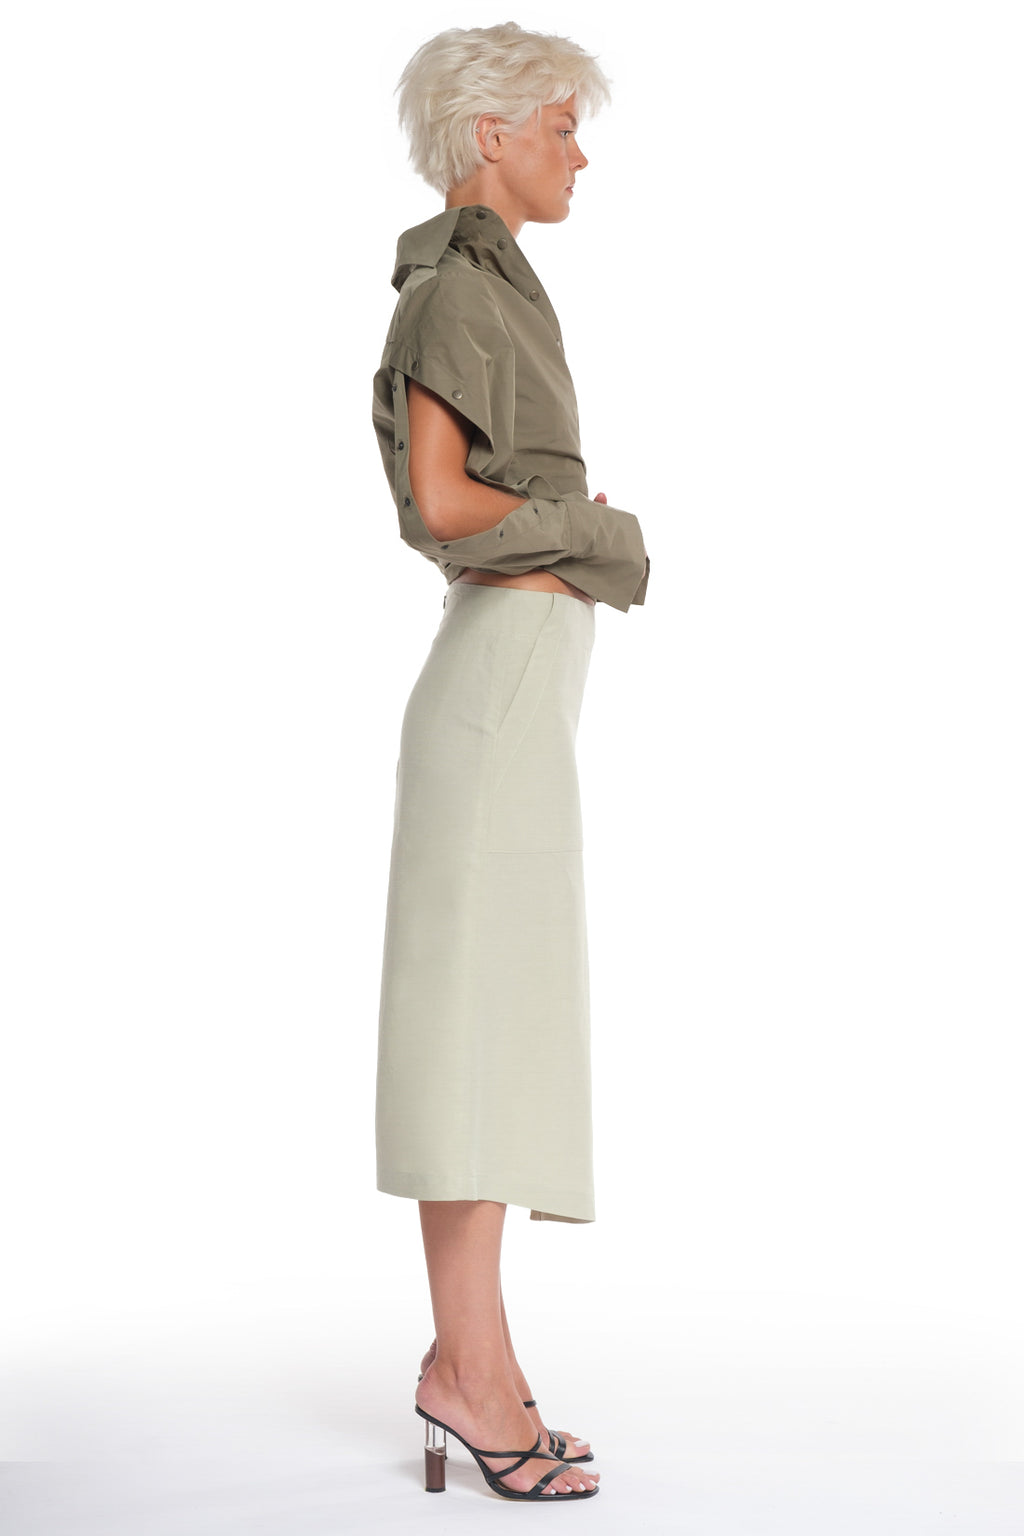 ASYMMETRICAL LONG SKIRT WITH CUTTING AND BUTTONING ON THE SIDEASYMMETRICAL LONG SKIRT WITH CUTTING AND BUTTONING ON THE SIDE